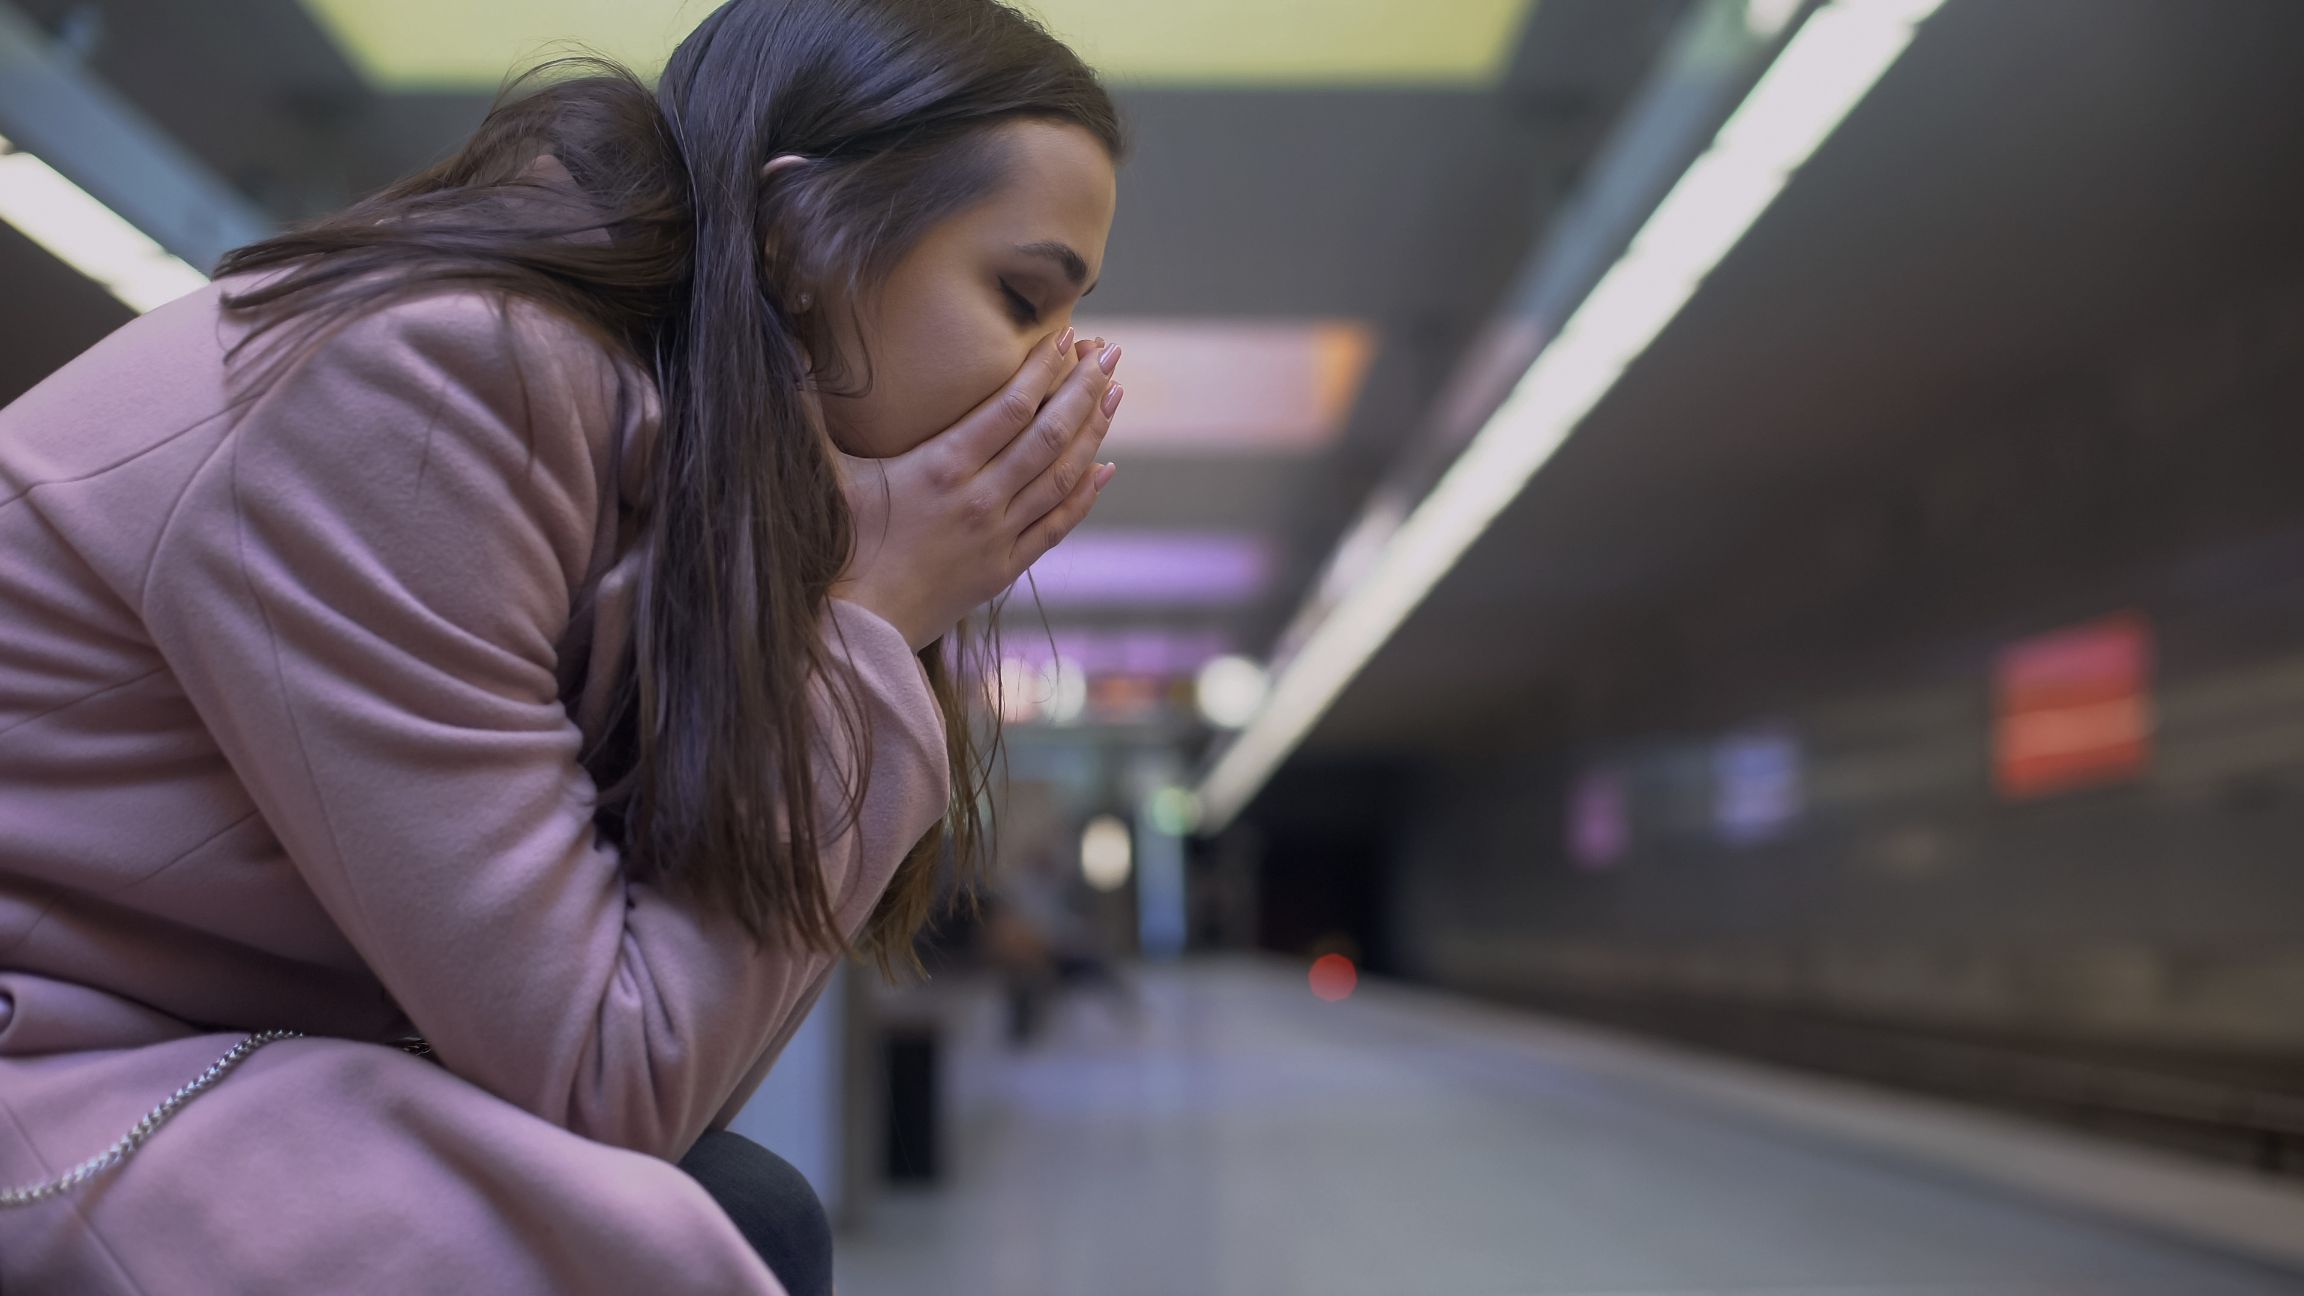 A woman sits with her hands over her mouth in a subway station.